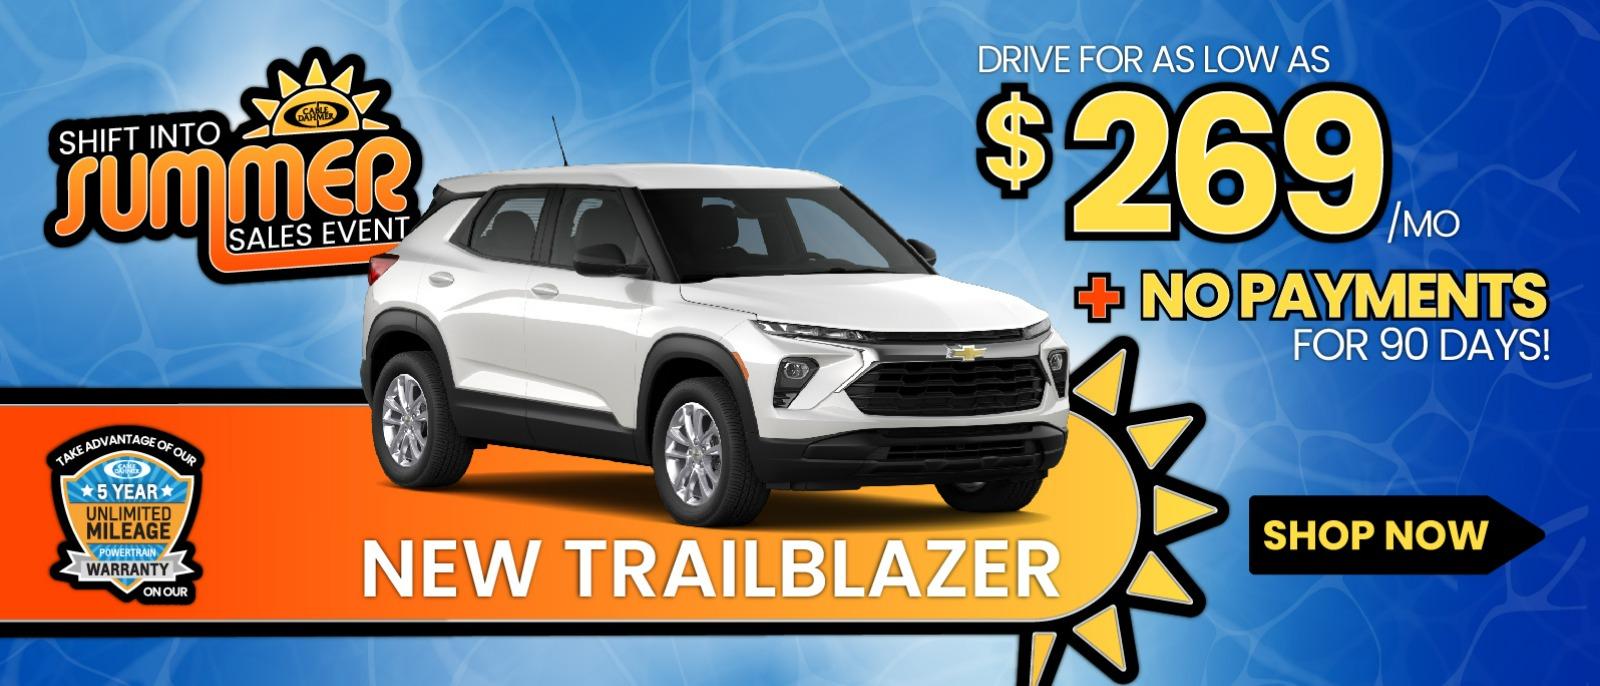 New Chevy Trailblazer for as little as $269 per month.